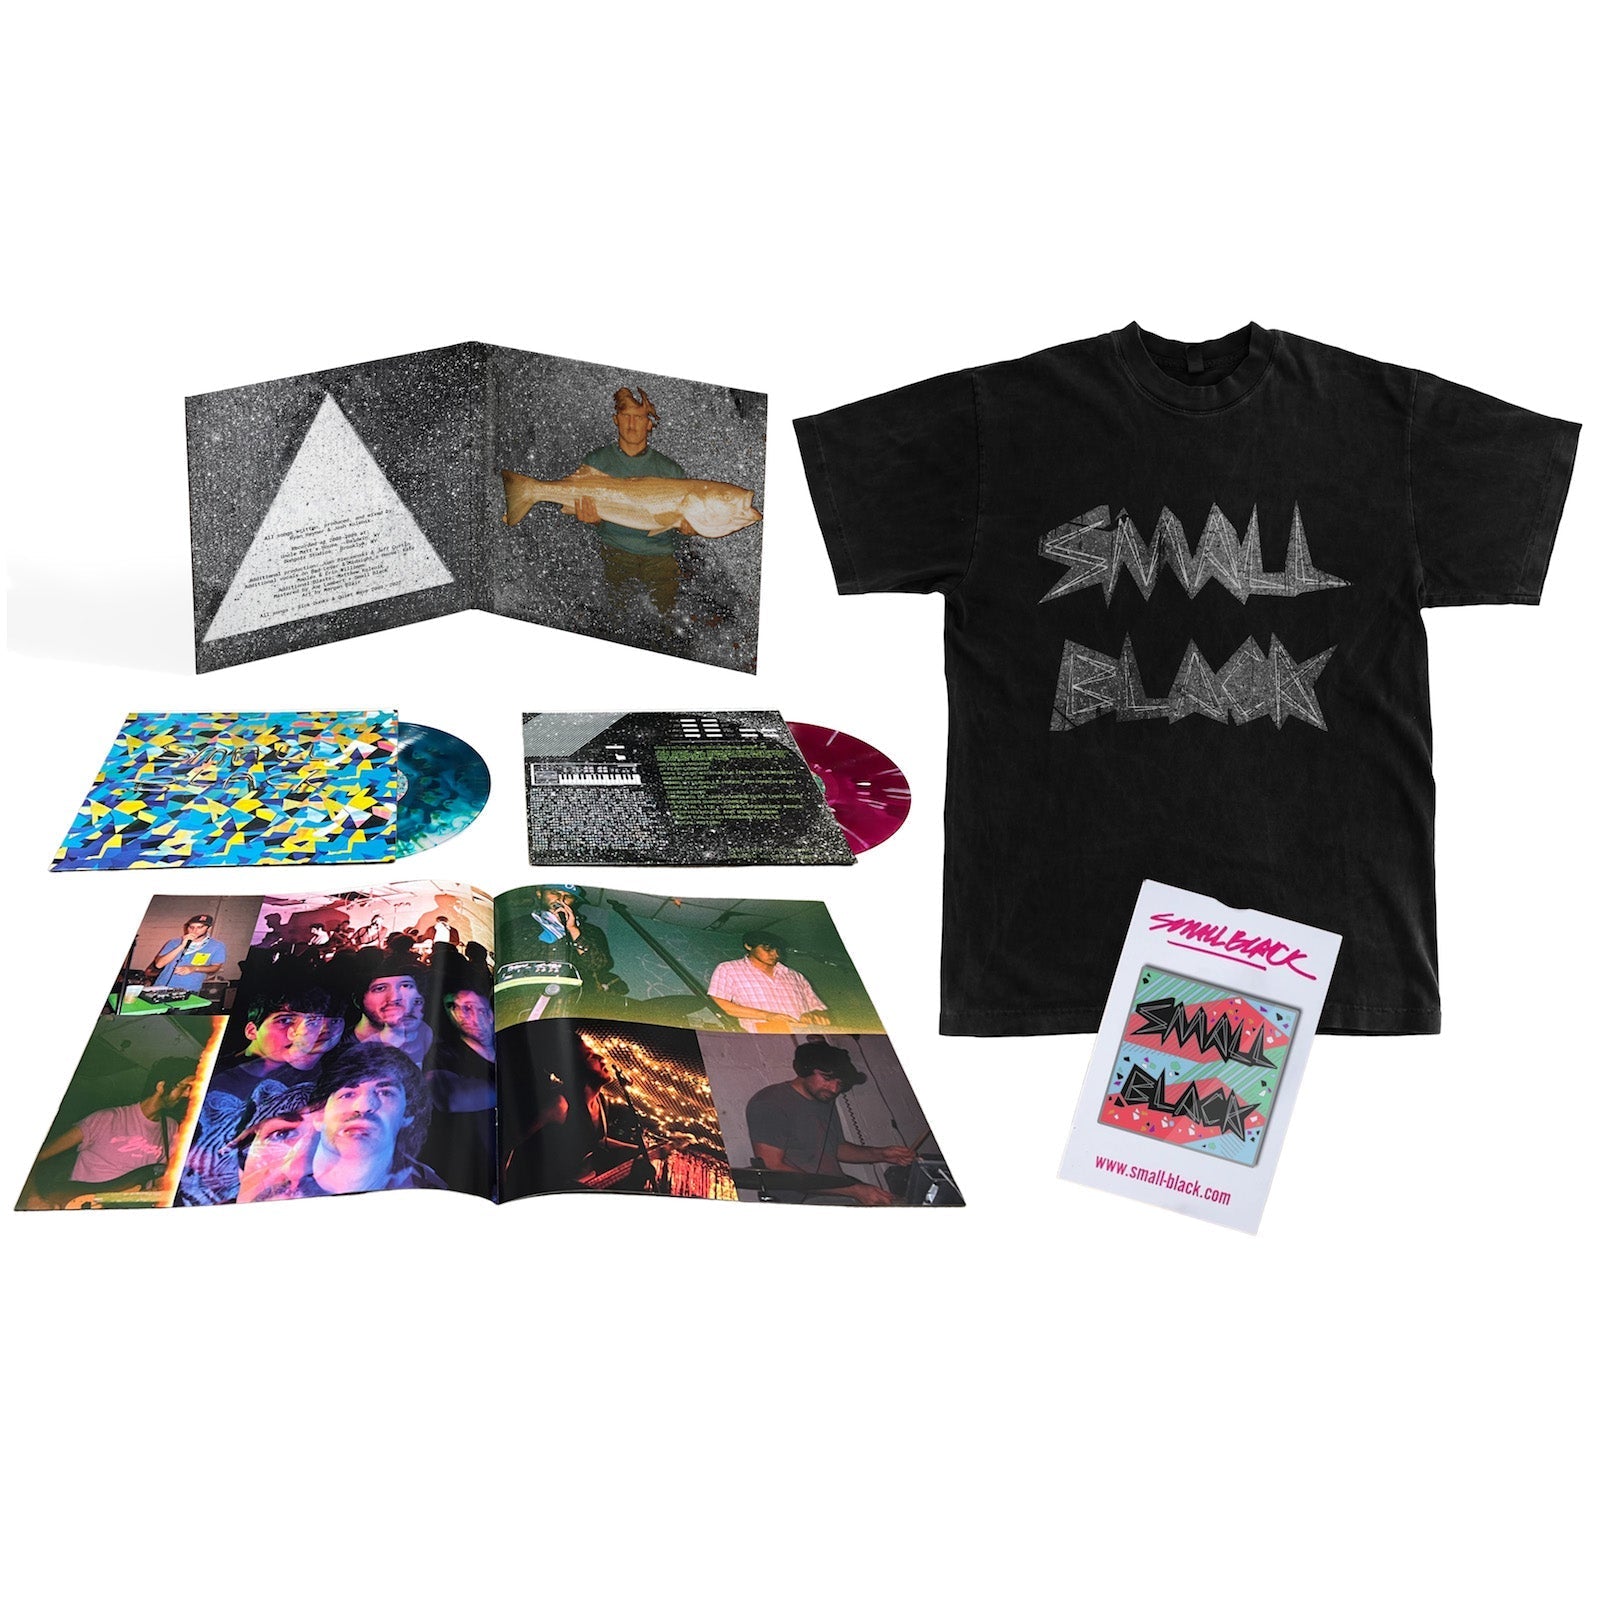 Small Black - Small Black Deluxe 2xLP Bundle w/ T-Shirt & Pin - 100% Electronica Official Store (Photo 1)